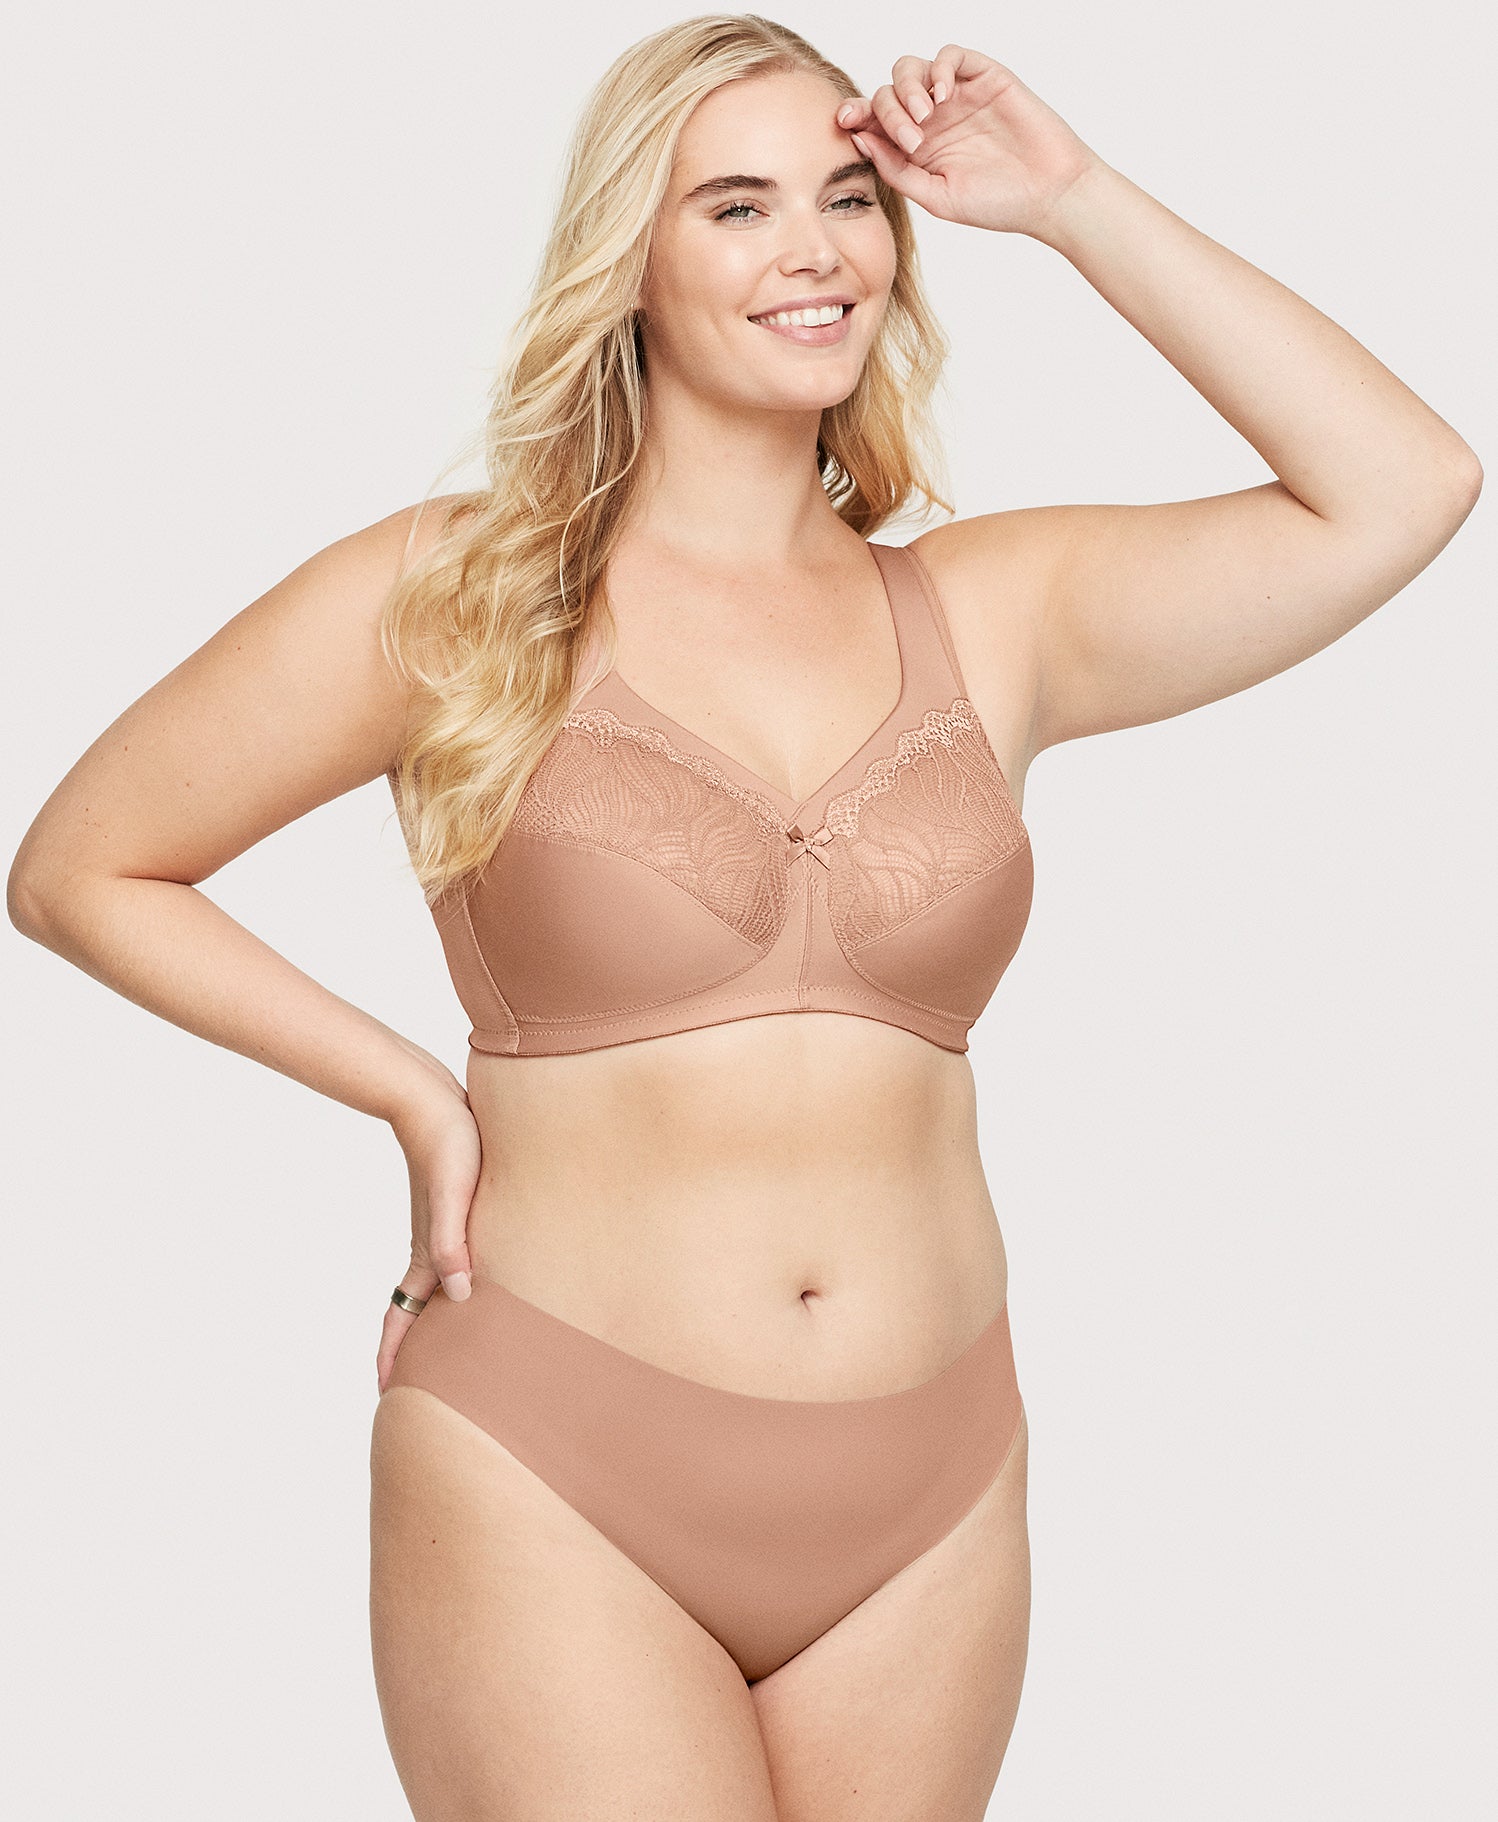 Stylish and Supportive Bra Pattern for Full-Figured Women